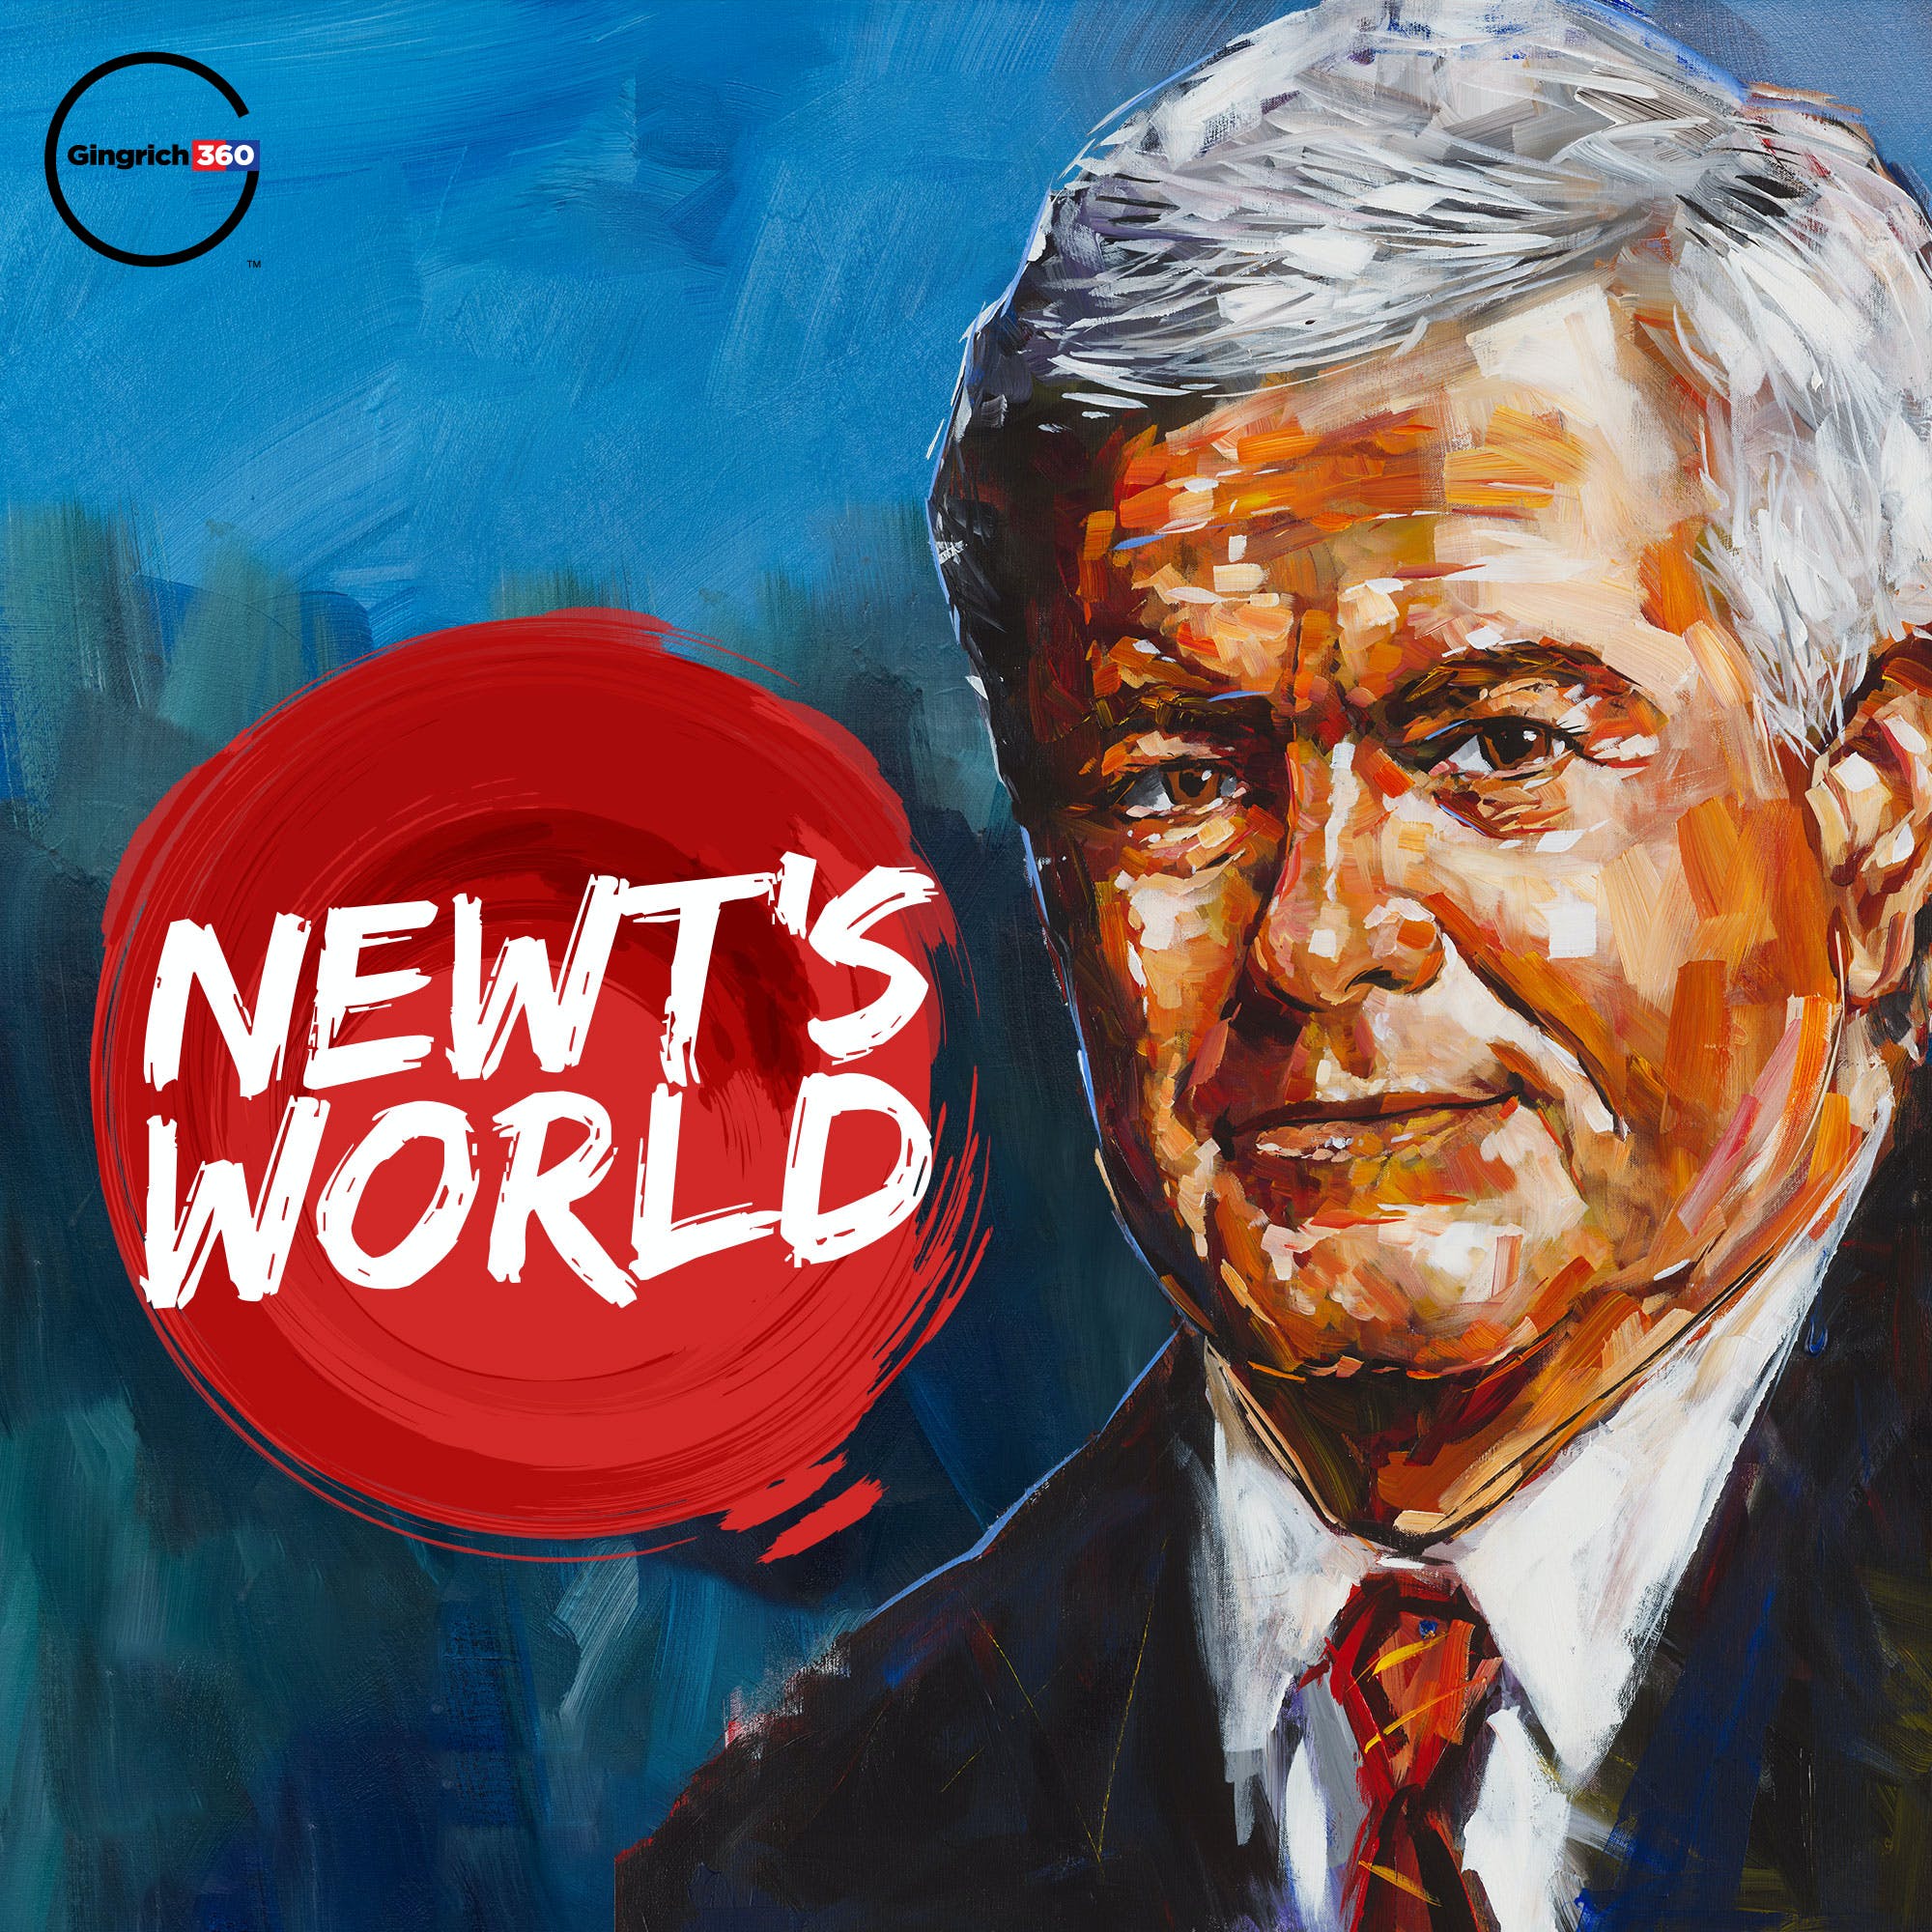 Episode 593: The Best of Newt's World - Walter Isaacson on The Code Breaker